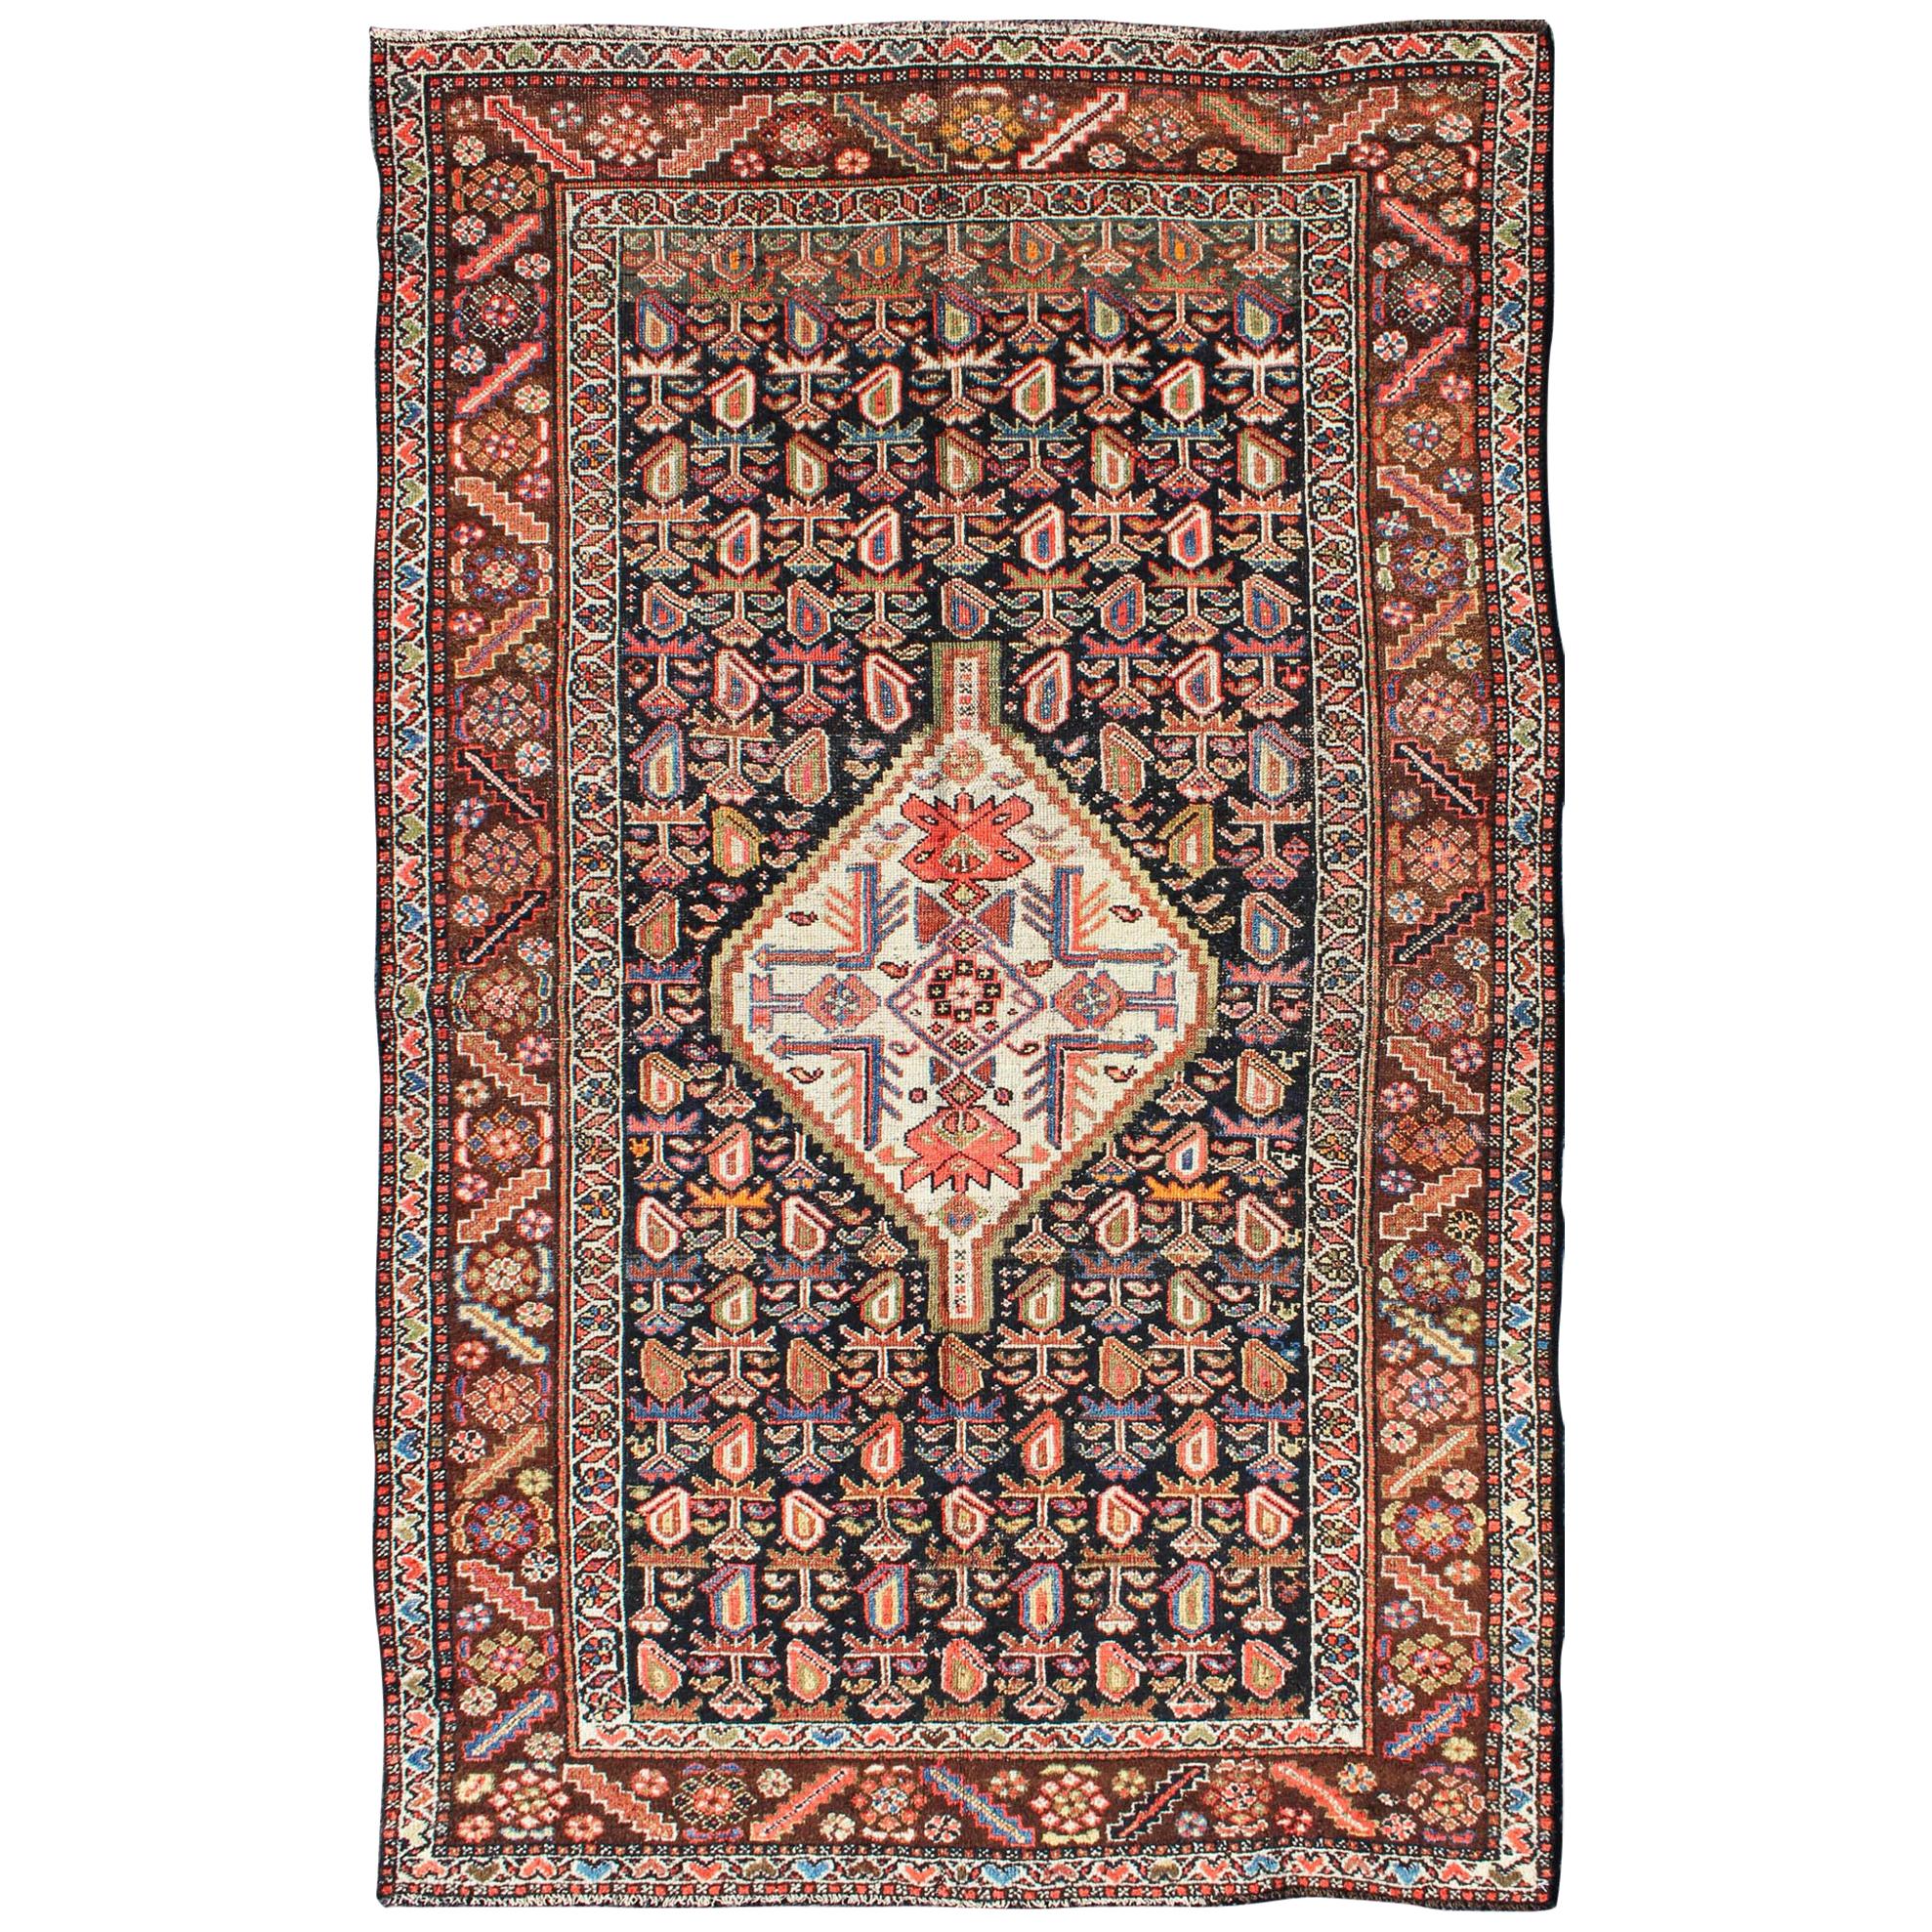 Antique Persian Kurdish Colorful Rug with Medallion and Geometric Motifs